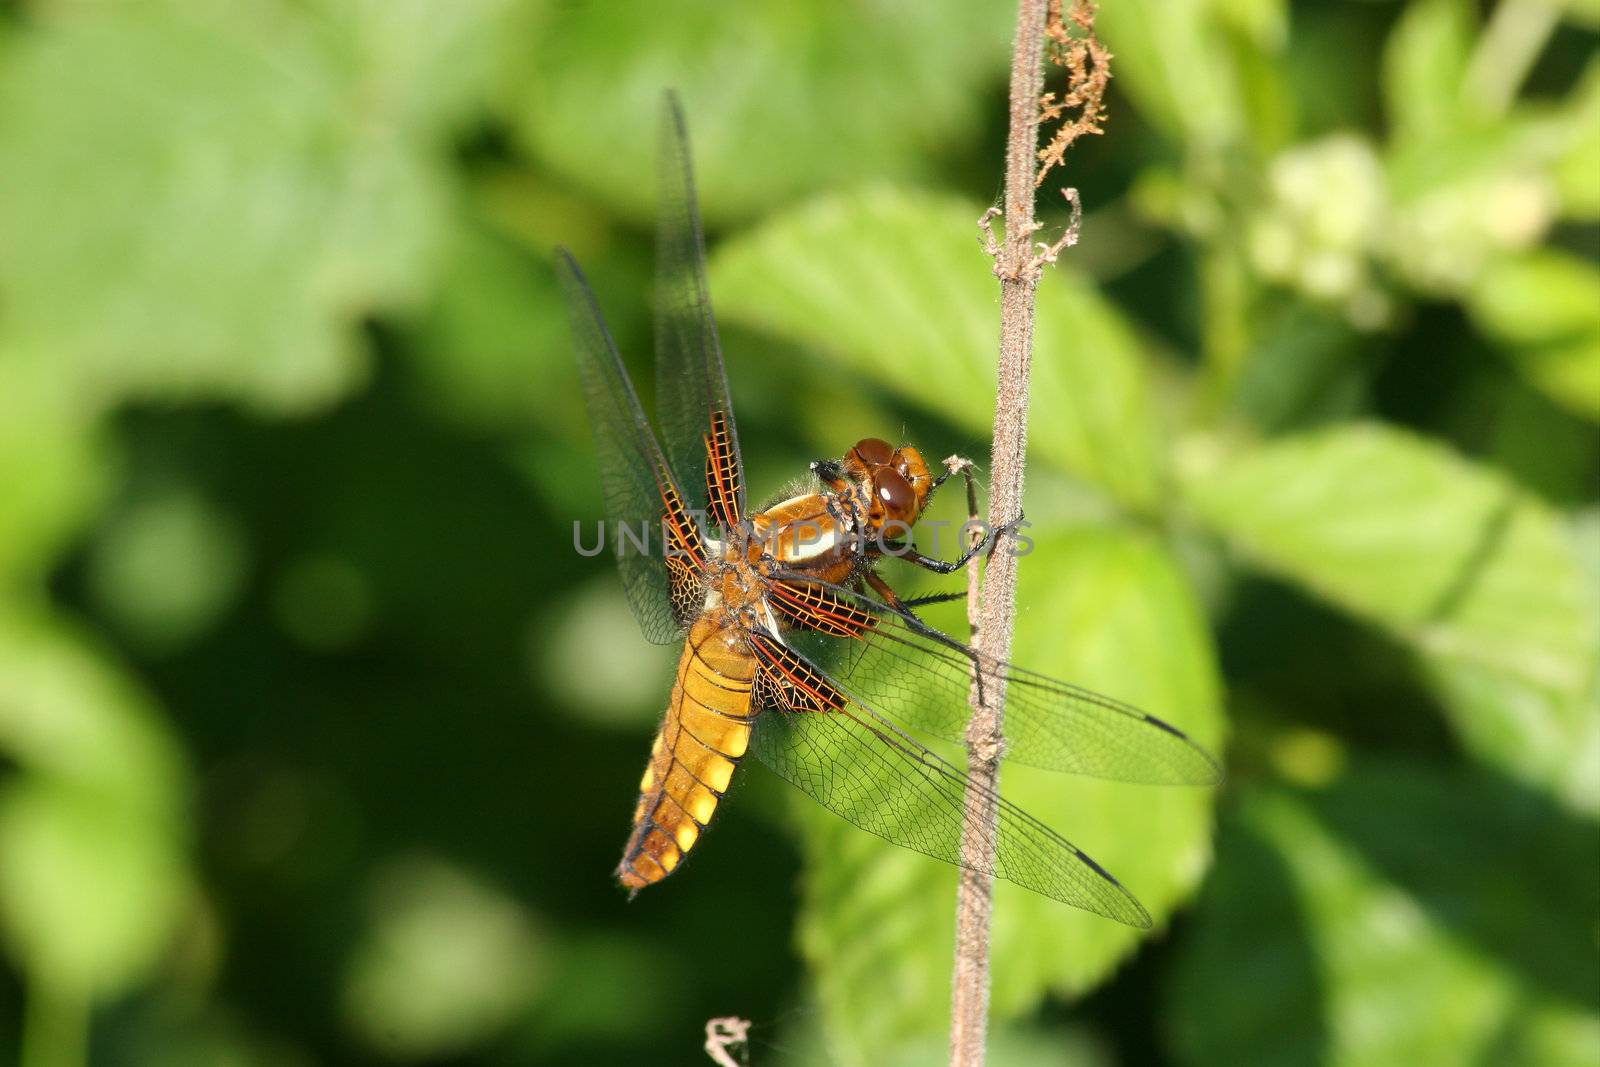 Broad-bodied Chaser (Libellula depressa) - female on a branch